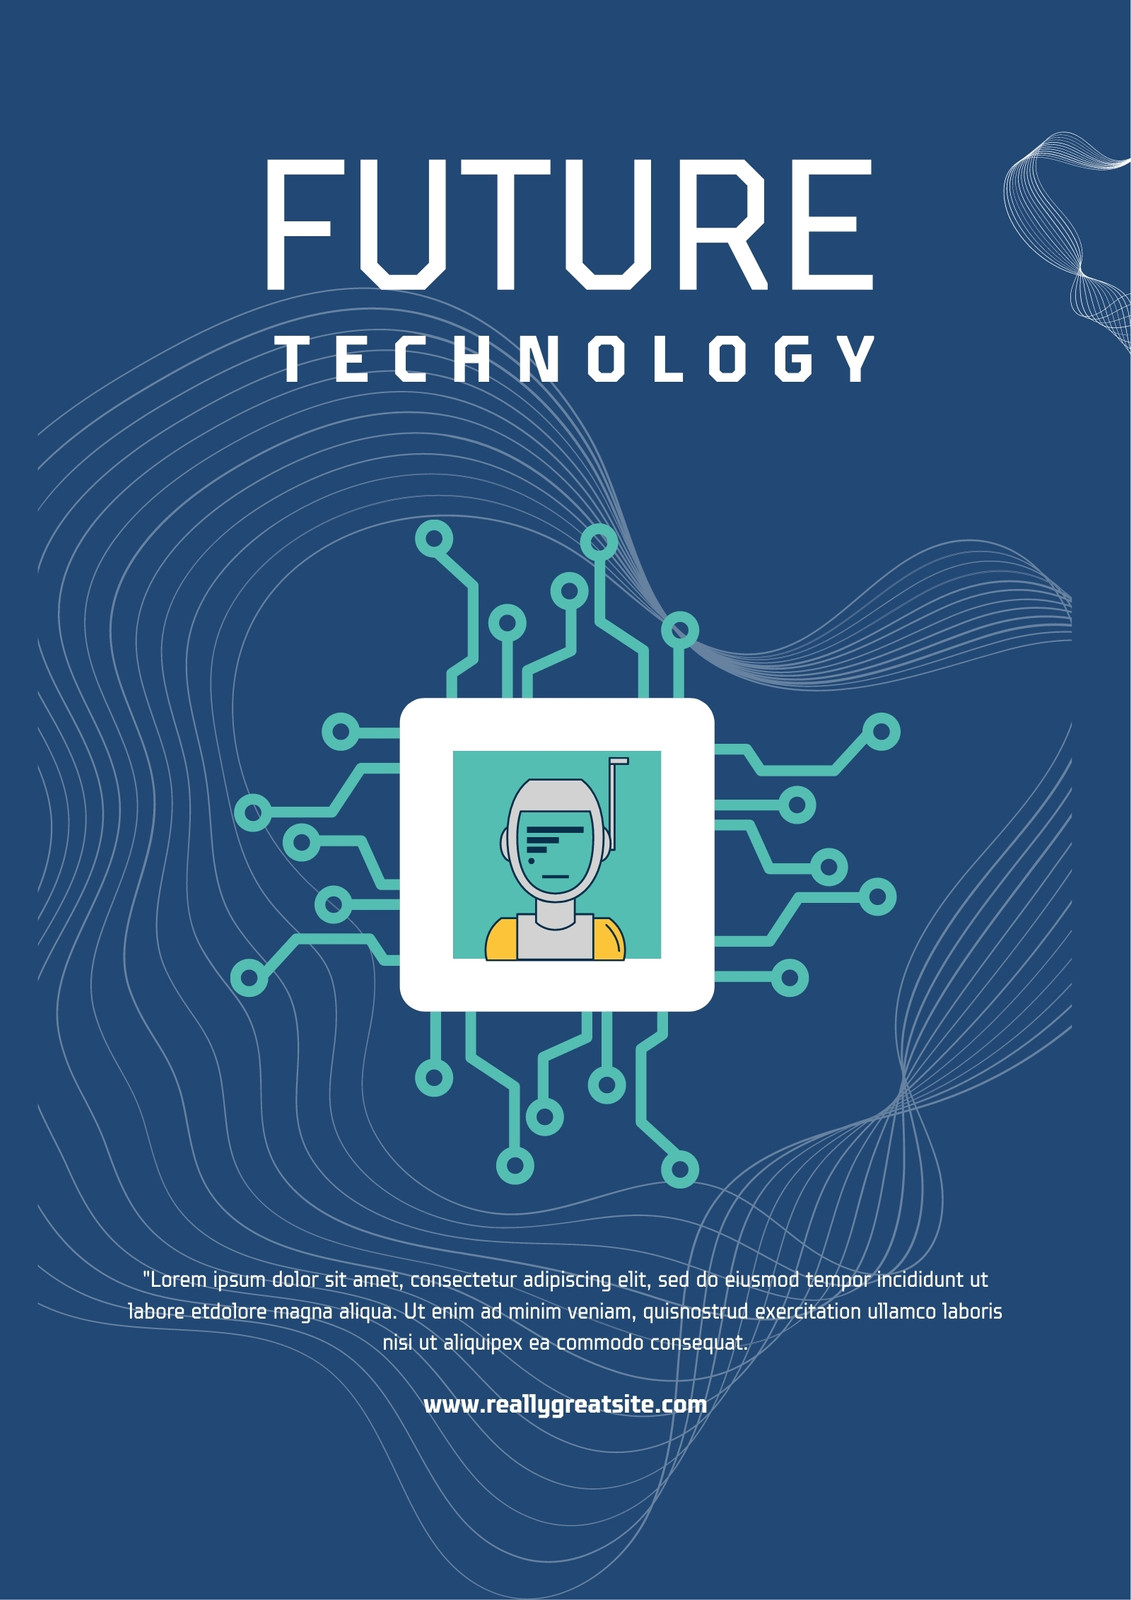 Customize 100+ Technology Poster Templates Online - Canva